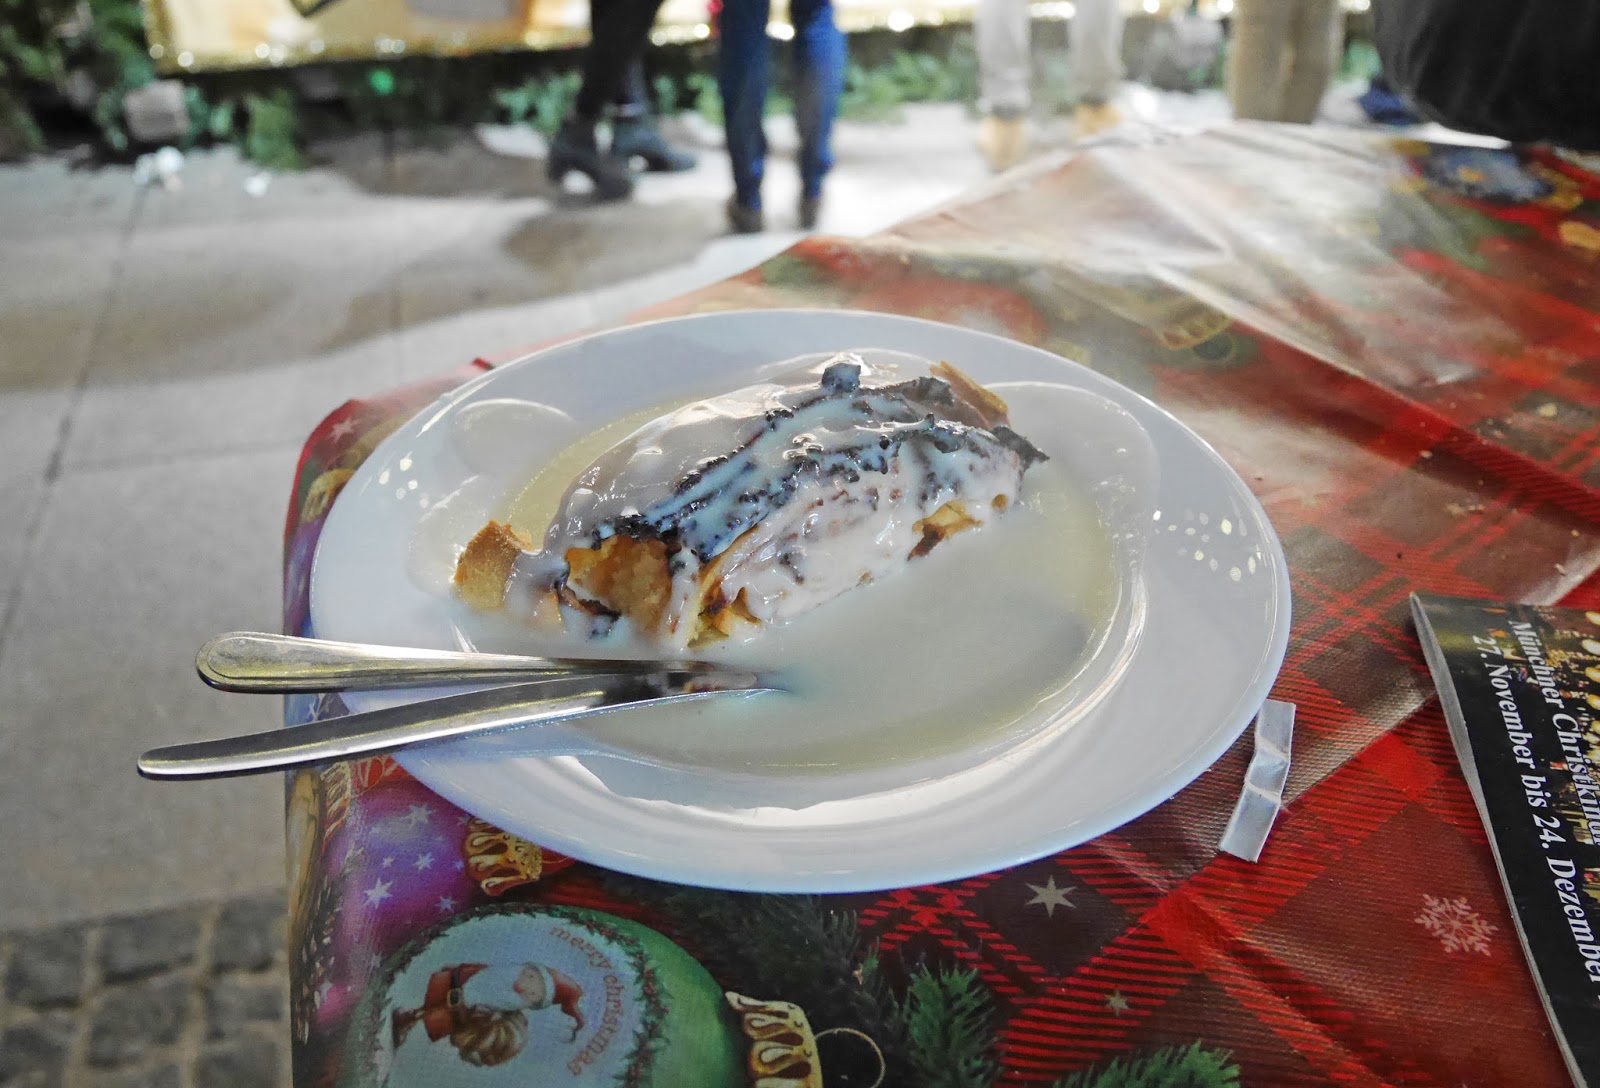 Apple strudel at the Munich Christmas Markets